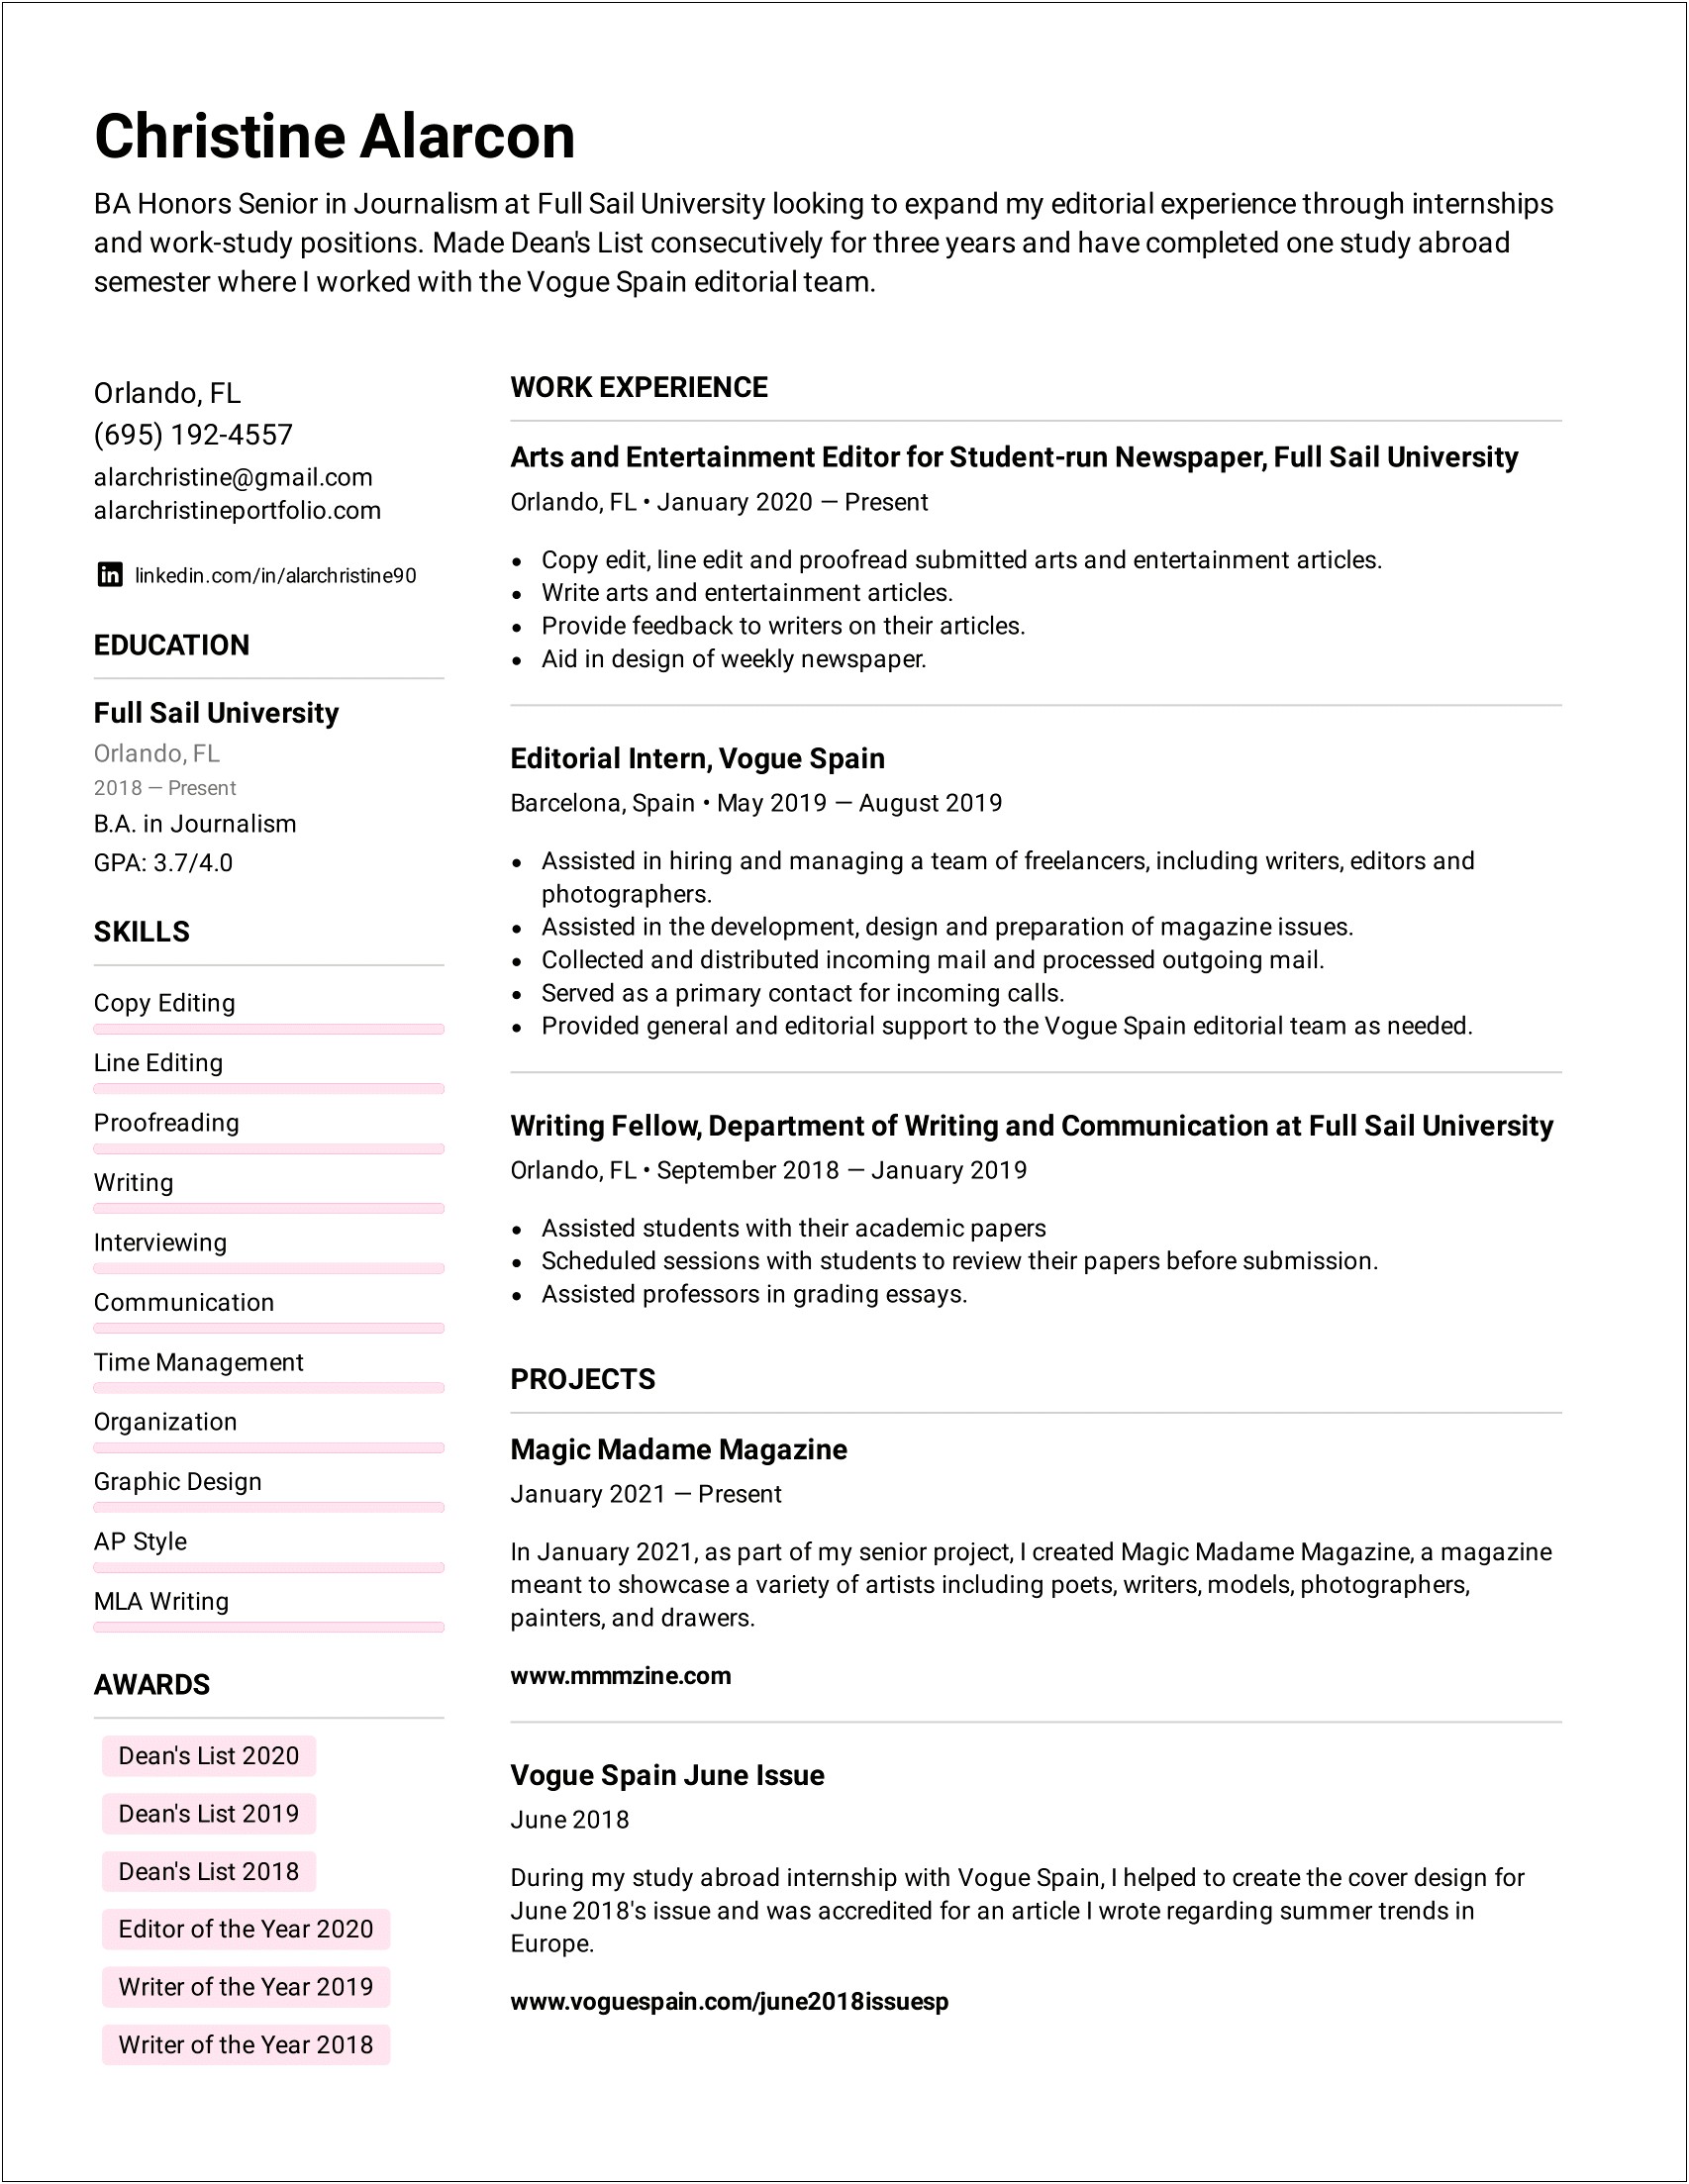 Listing Work Awards And Achievements On Resume